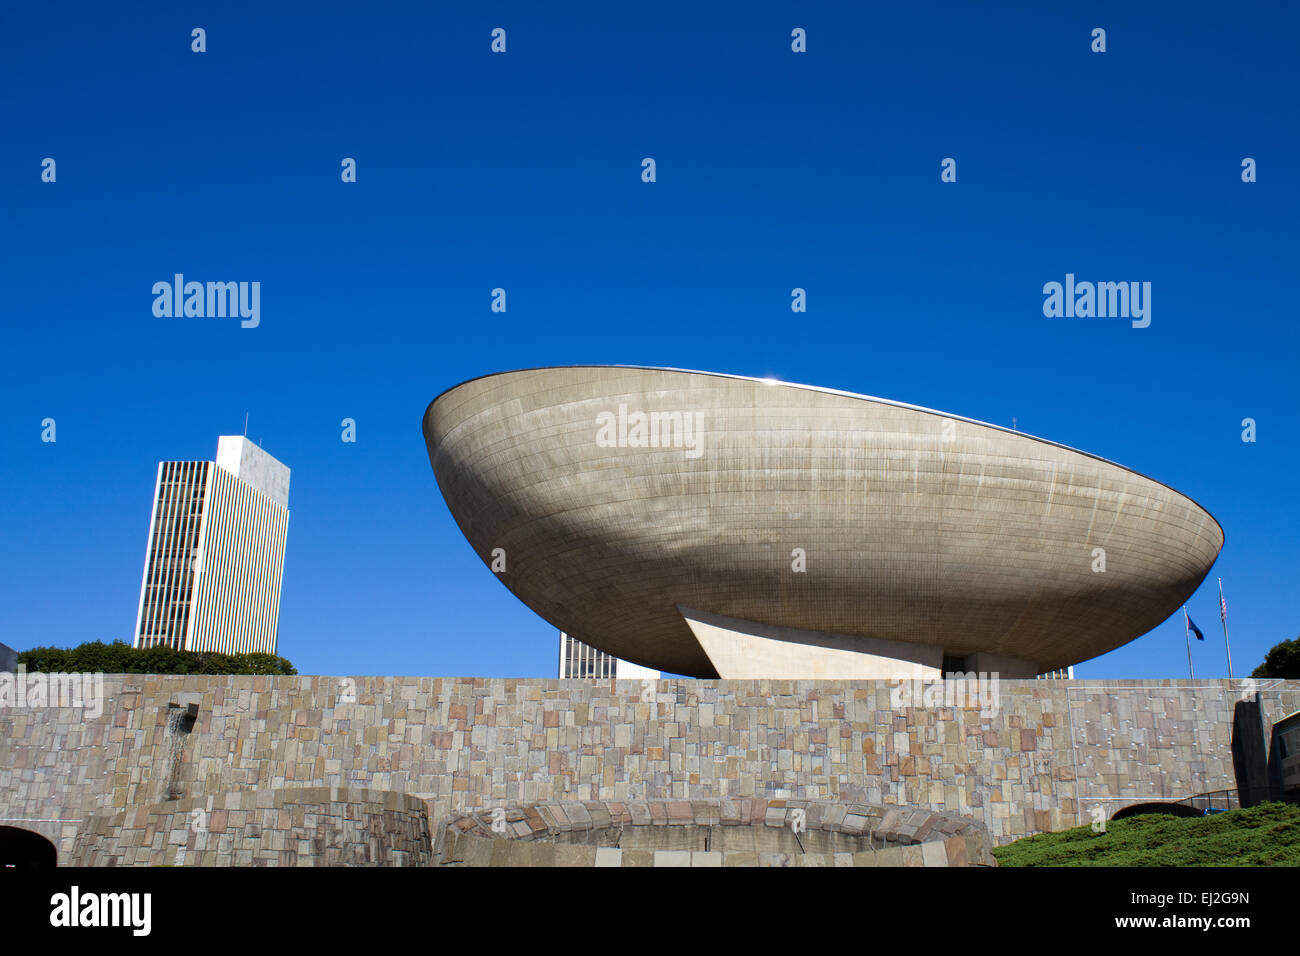 The Egg theater in Albany, New York is a performing art center and is part of the Empire State Plaza owned by the state of NY. Stock Photo